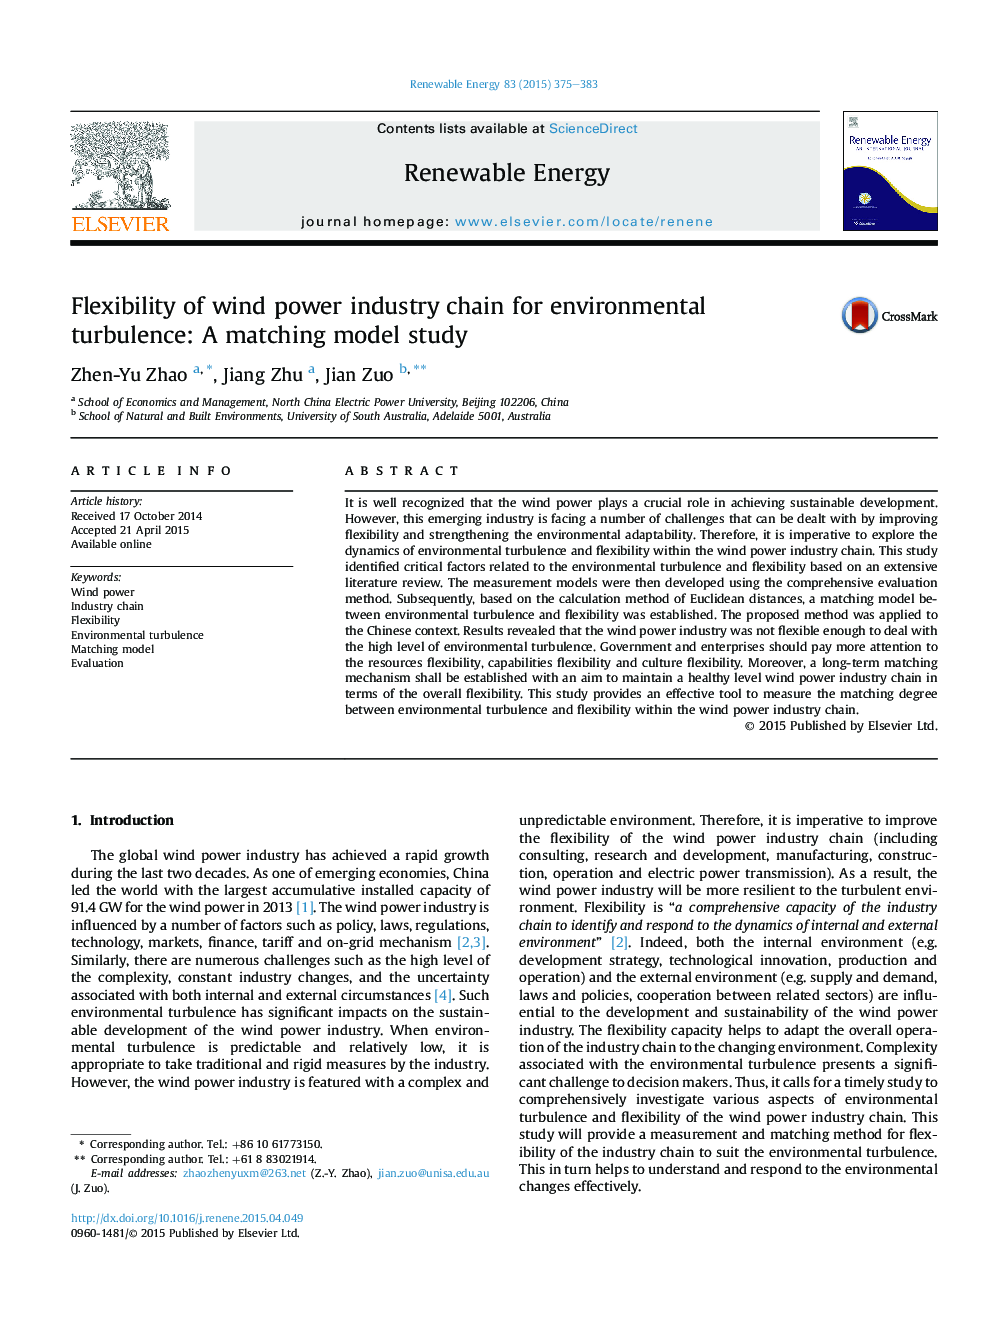 Flexibility of wind power industry chain for environmental turbulence: A matching model study